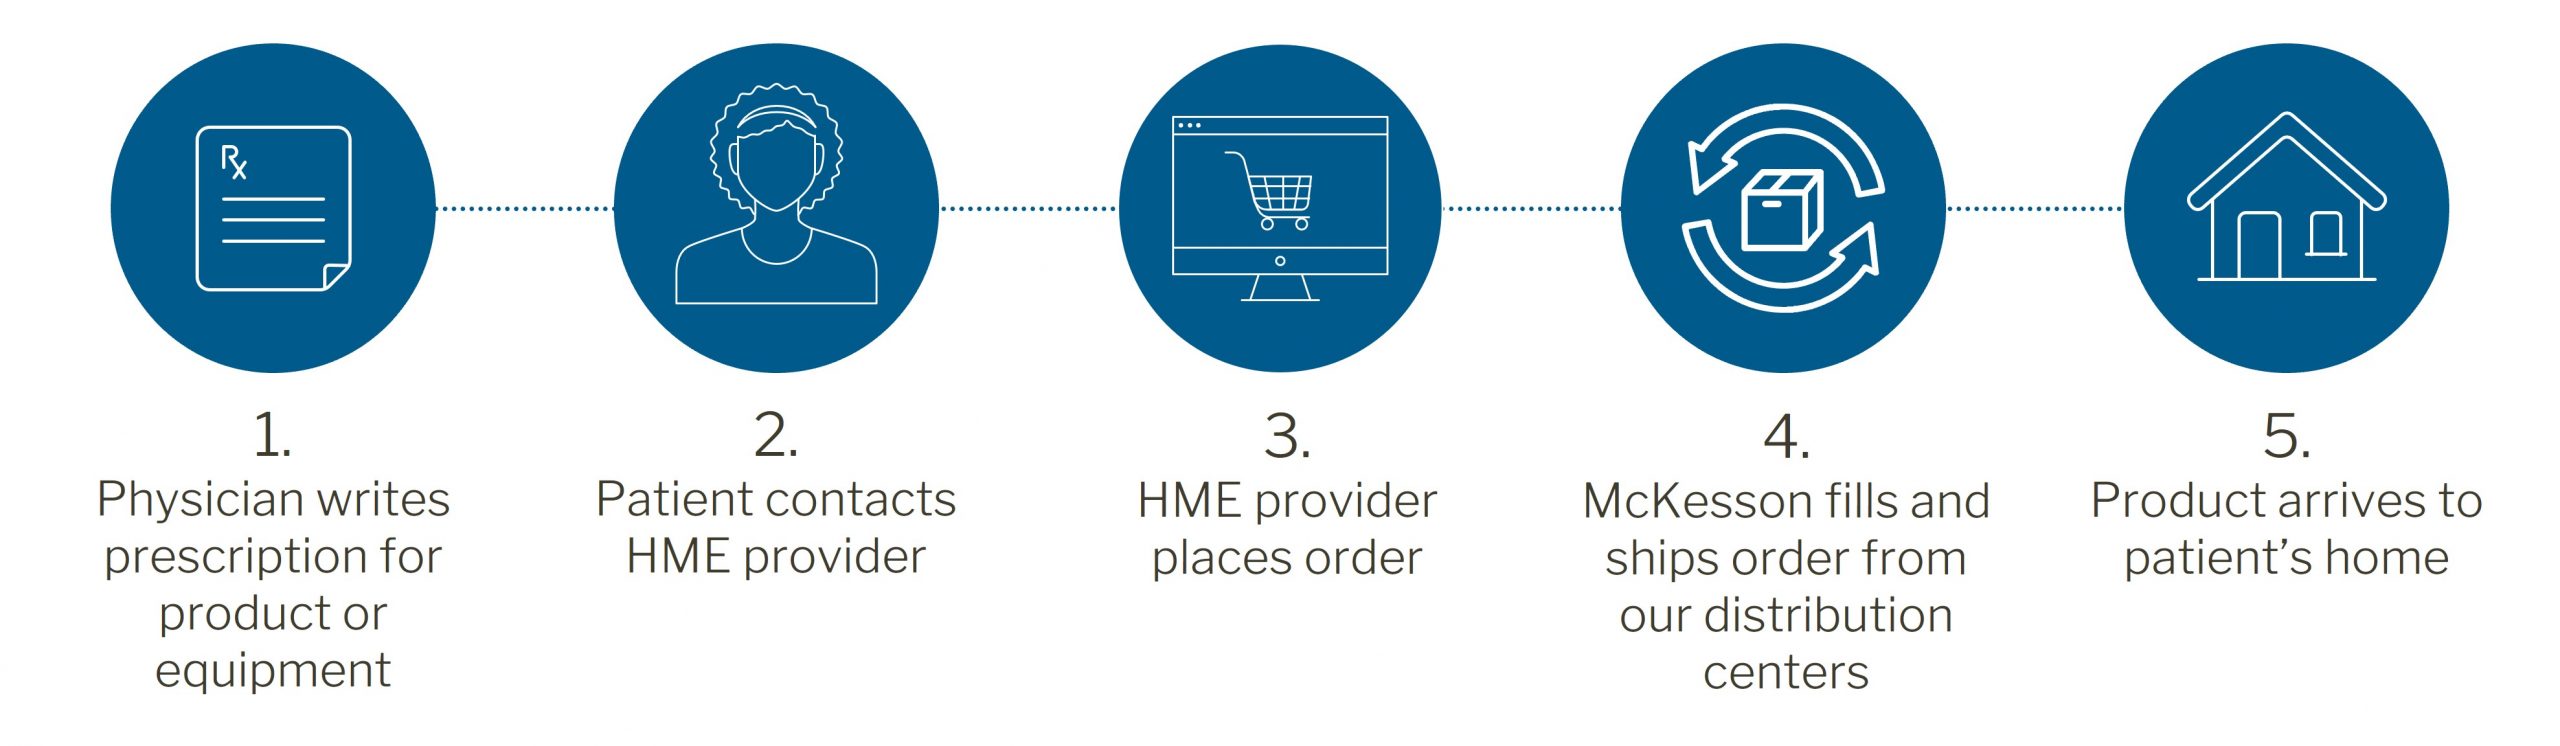 How patient home delivery works